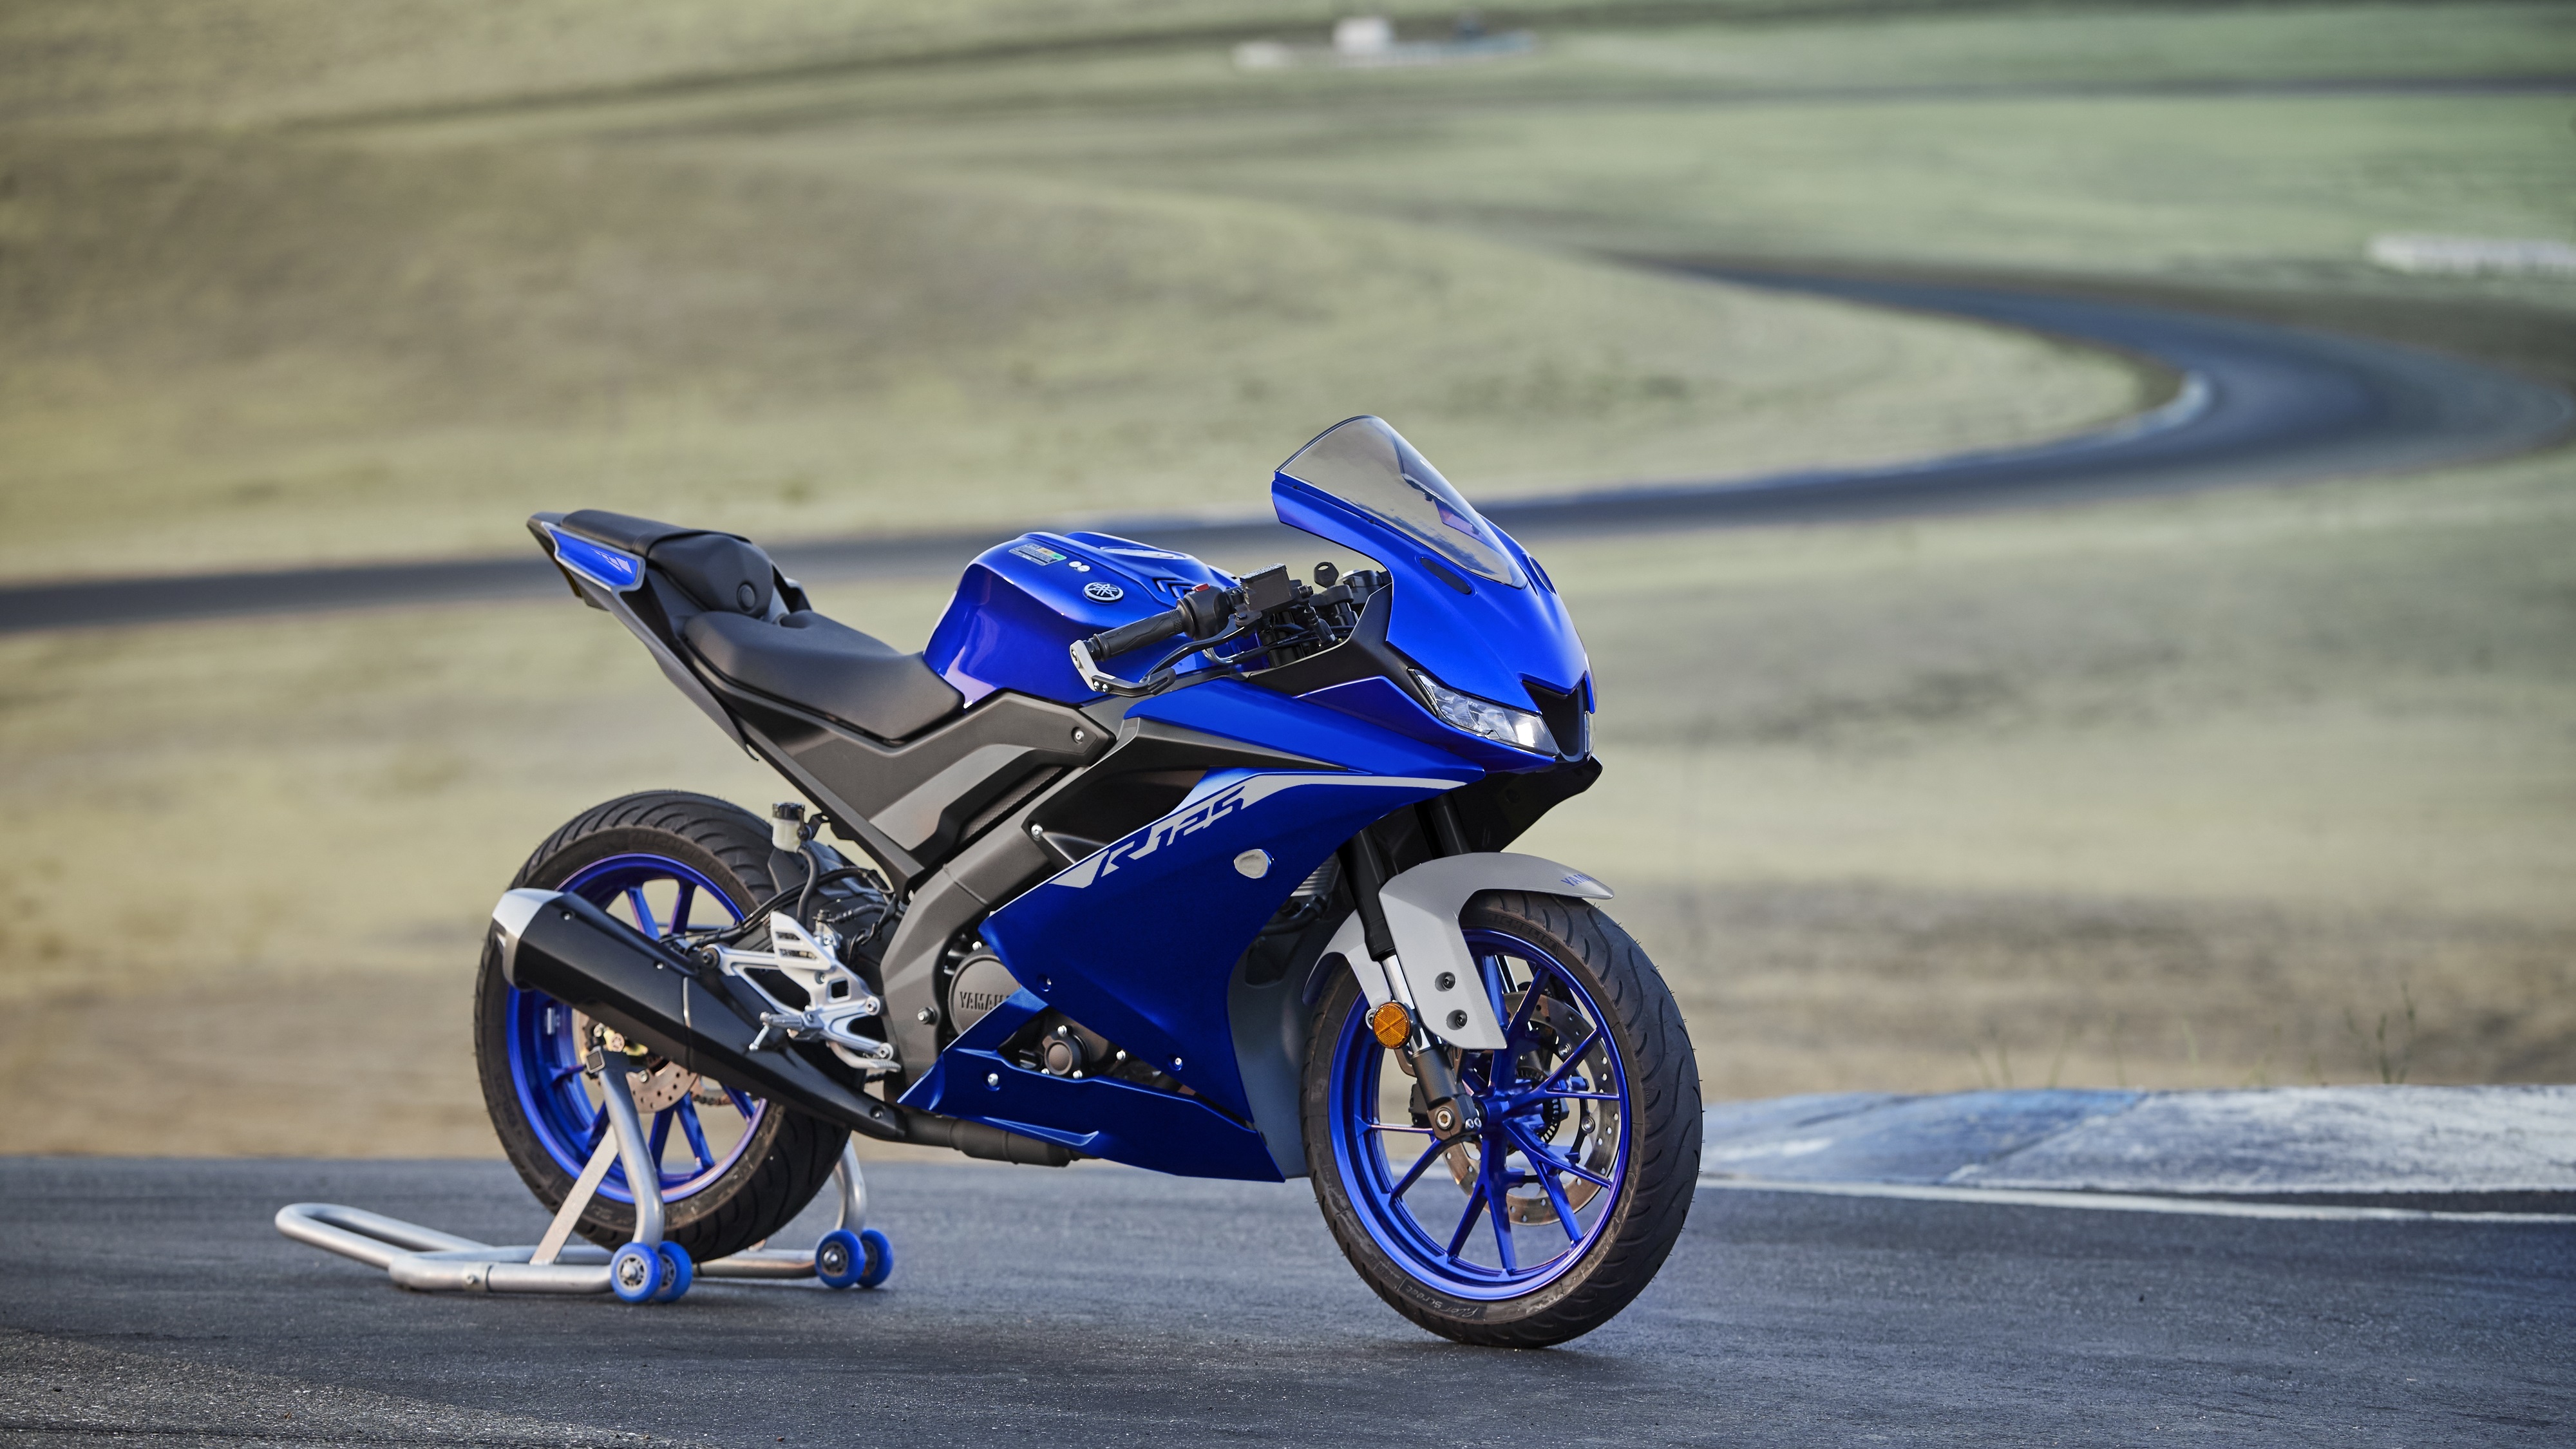 Yamaha YZF-R125 Motorbikes For Sale - The Market